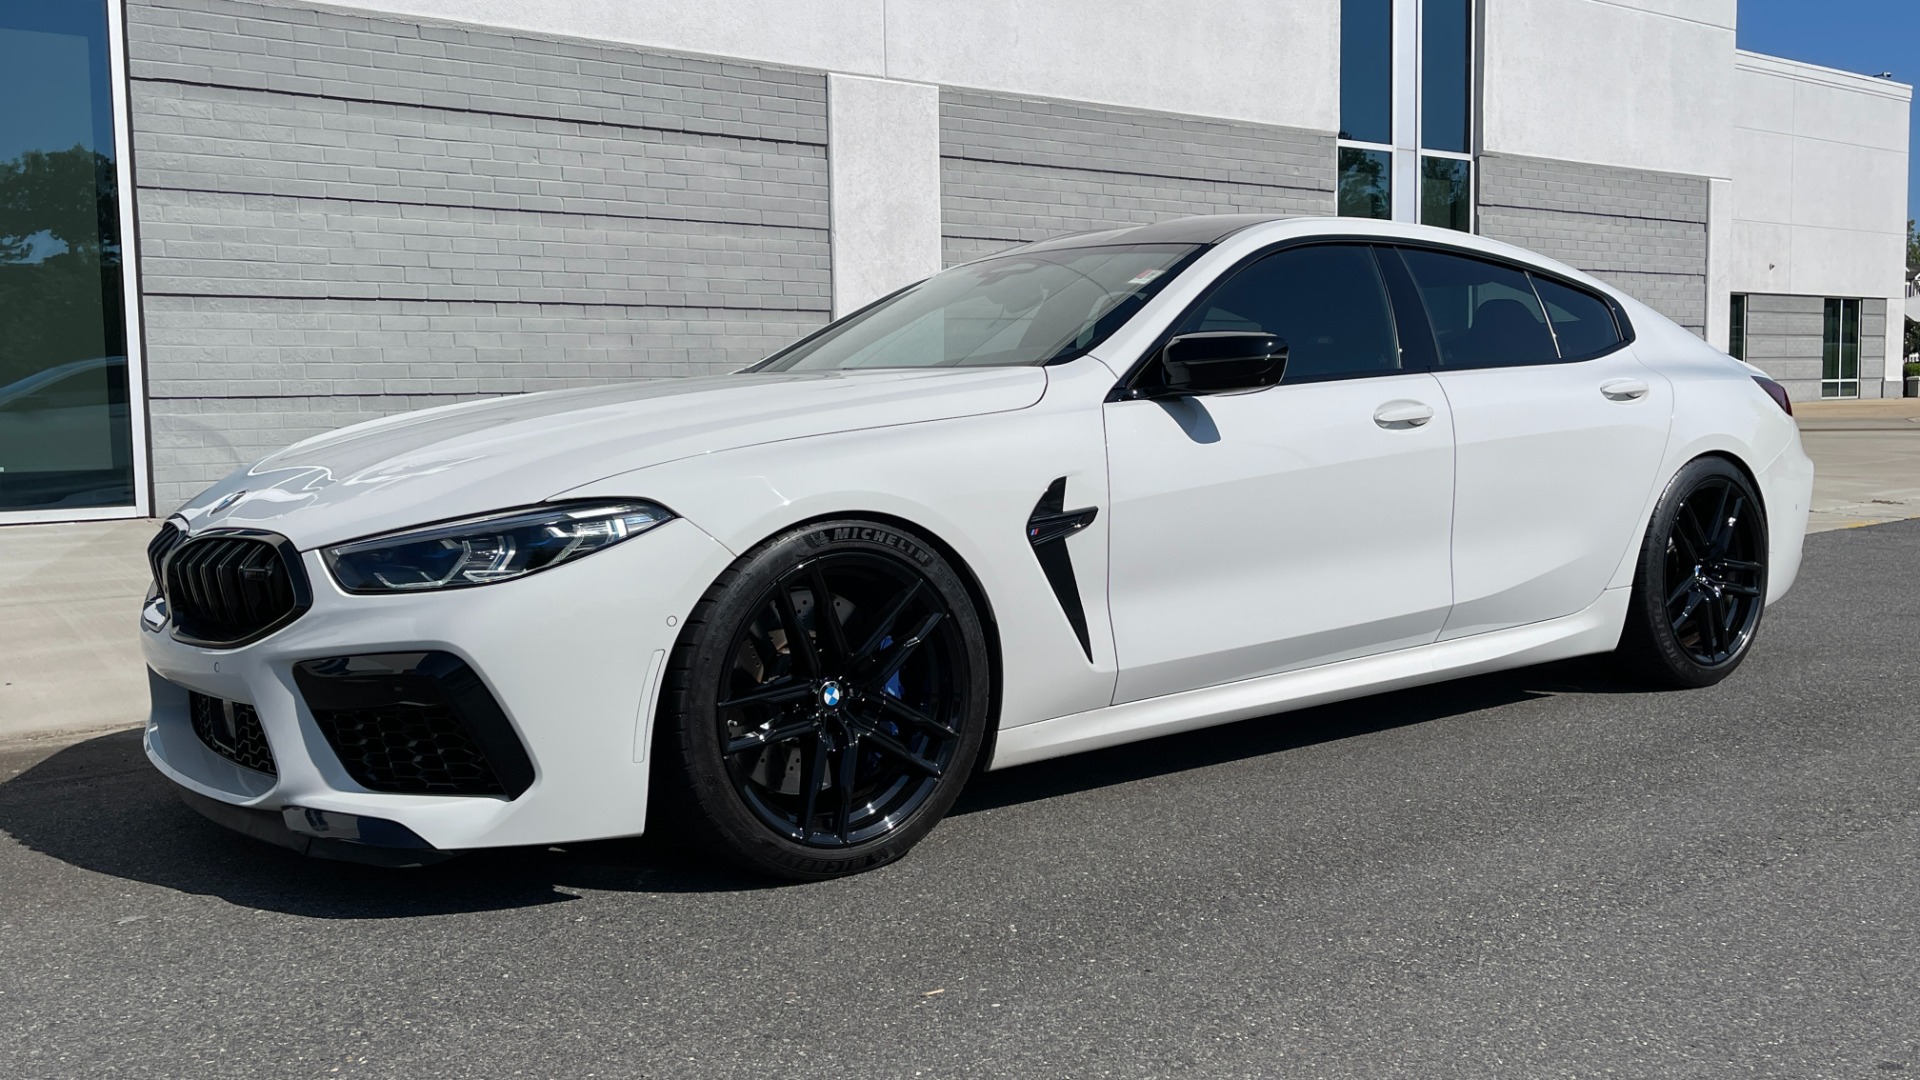 Used 2020 BMW M8 COMPETITON / TWIN TURBO / KW V3 SUSPENSION / FRONT LIFT / PPF / CERAMIC COA for sale $114,999 at Formula Imports in Charlotte NC 28227 3